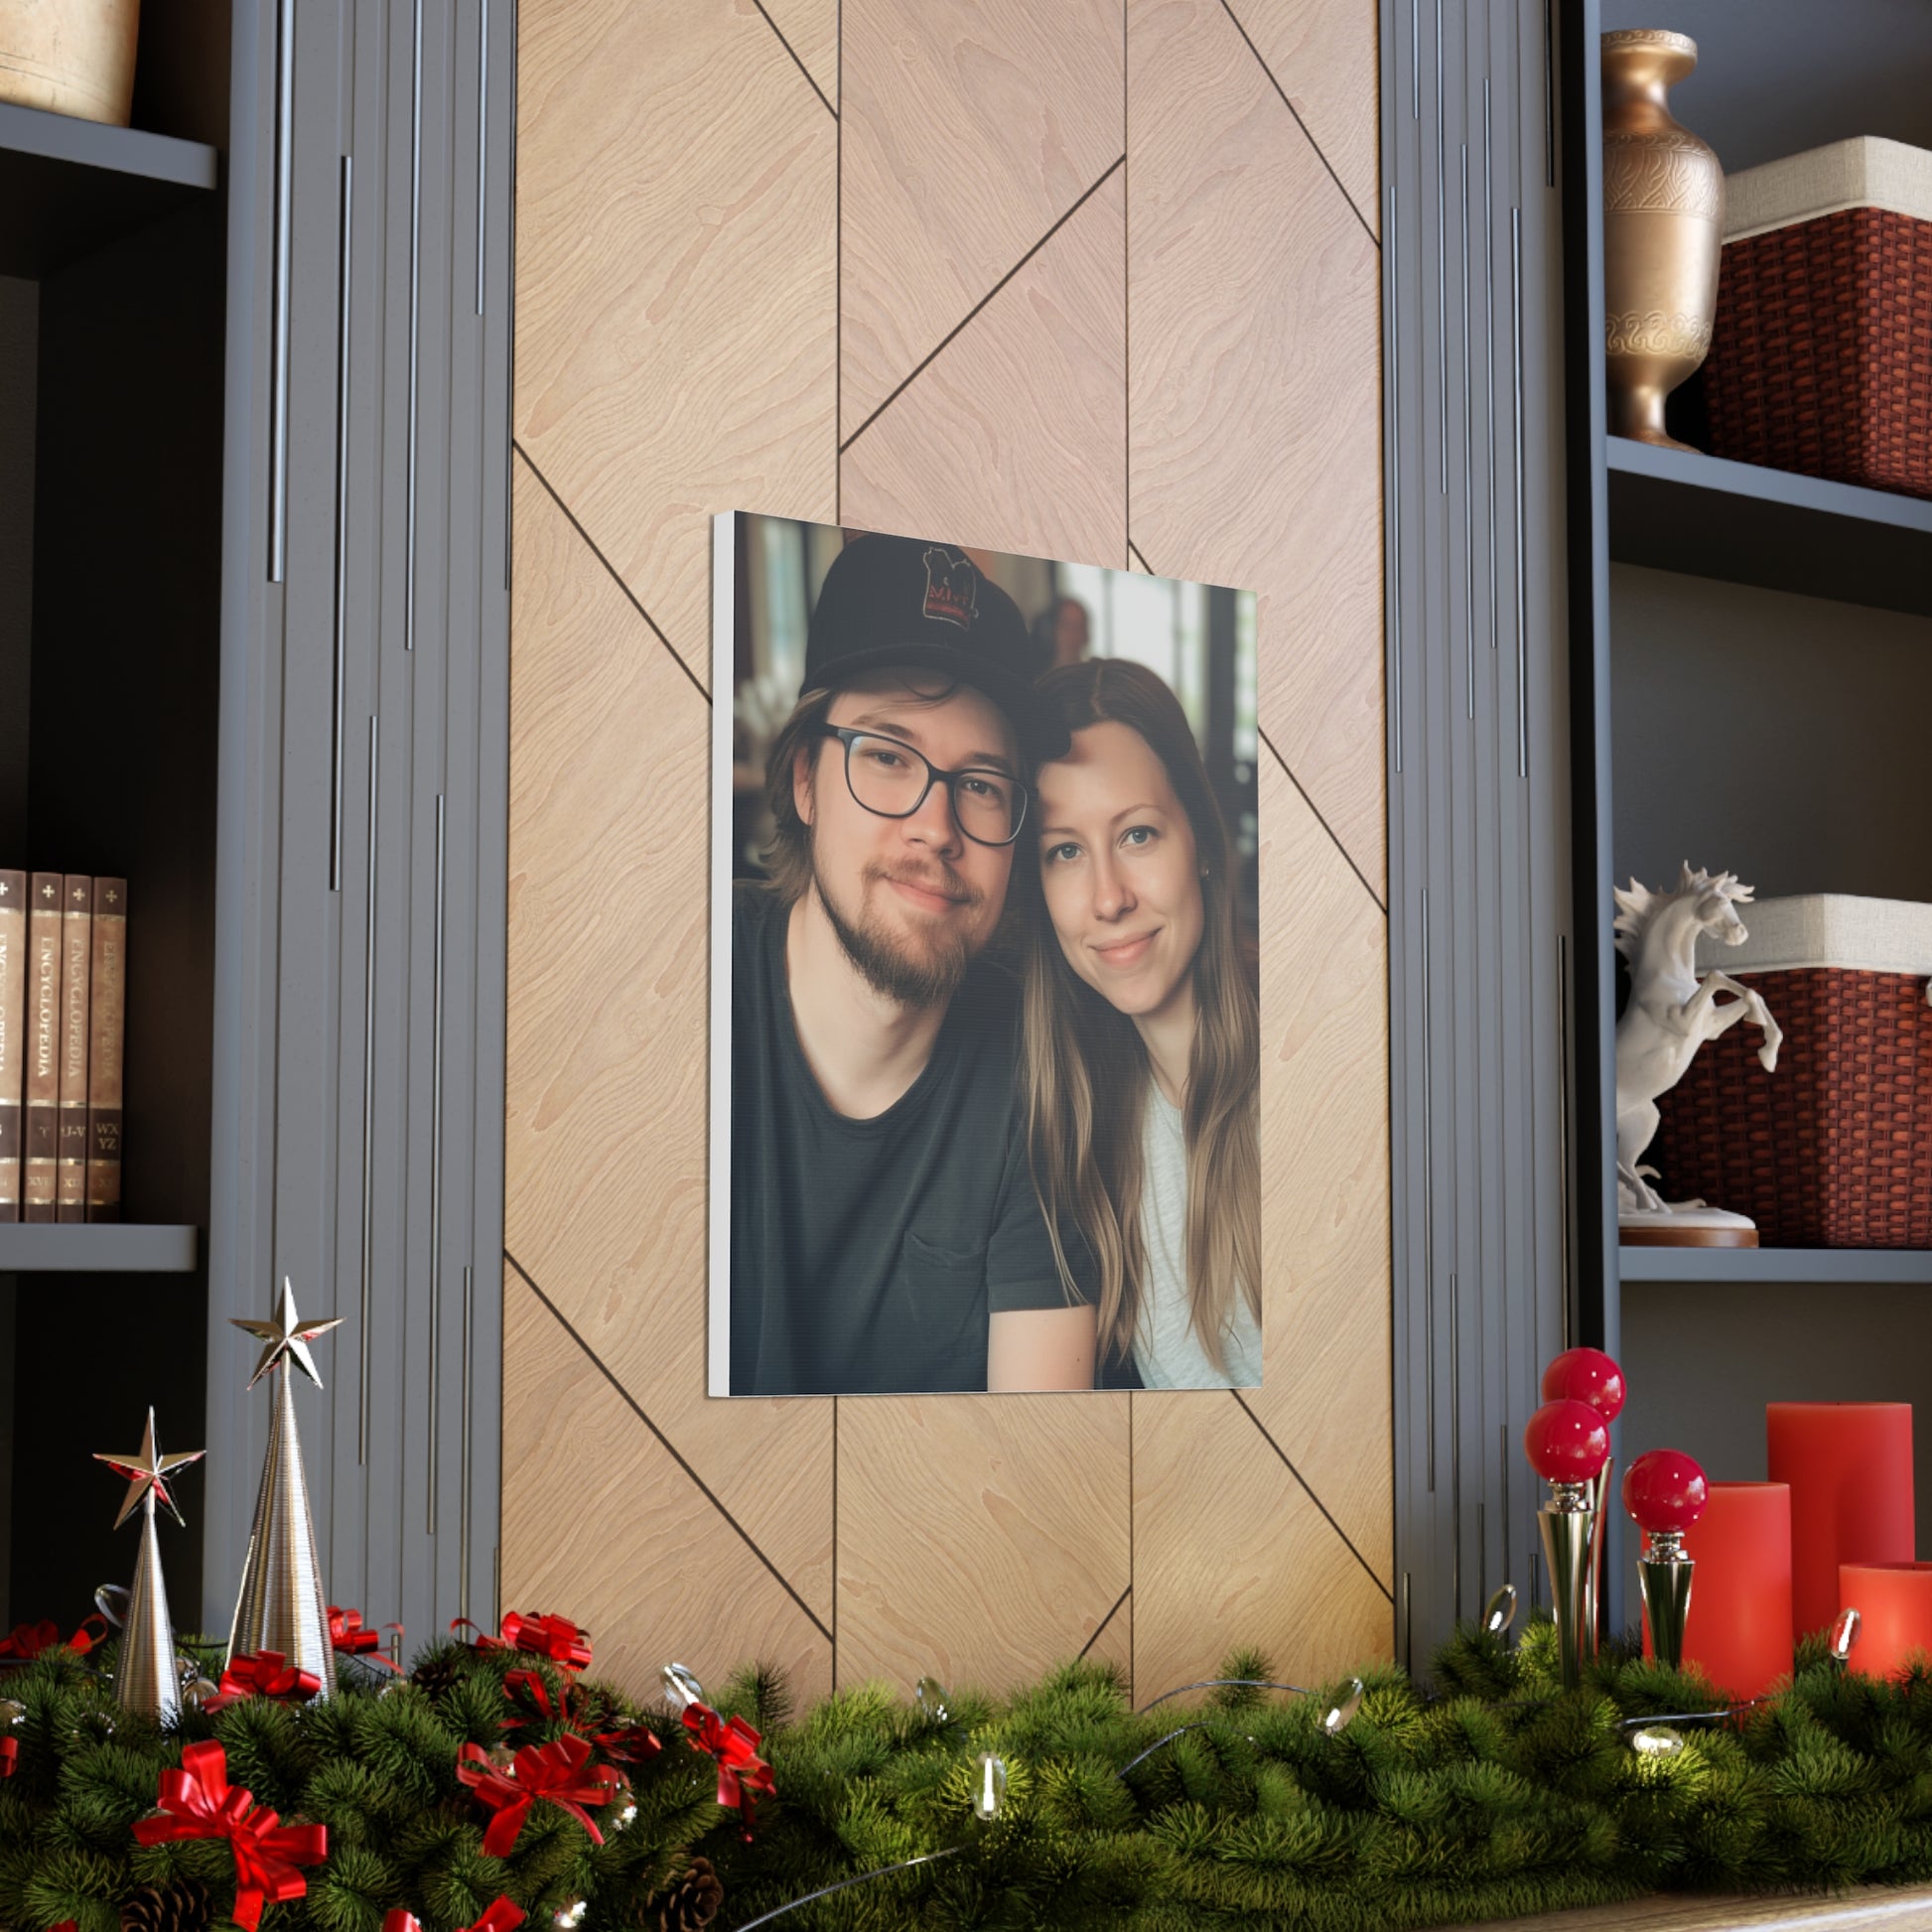 "Precious Memories" Custom Wall Art - Weave Got Gifts - Unique Gifts You Won’t Find Anywhere Else!